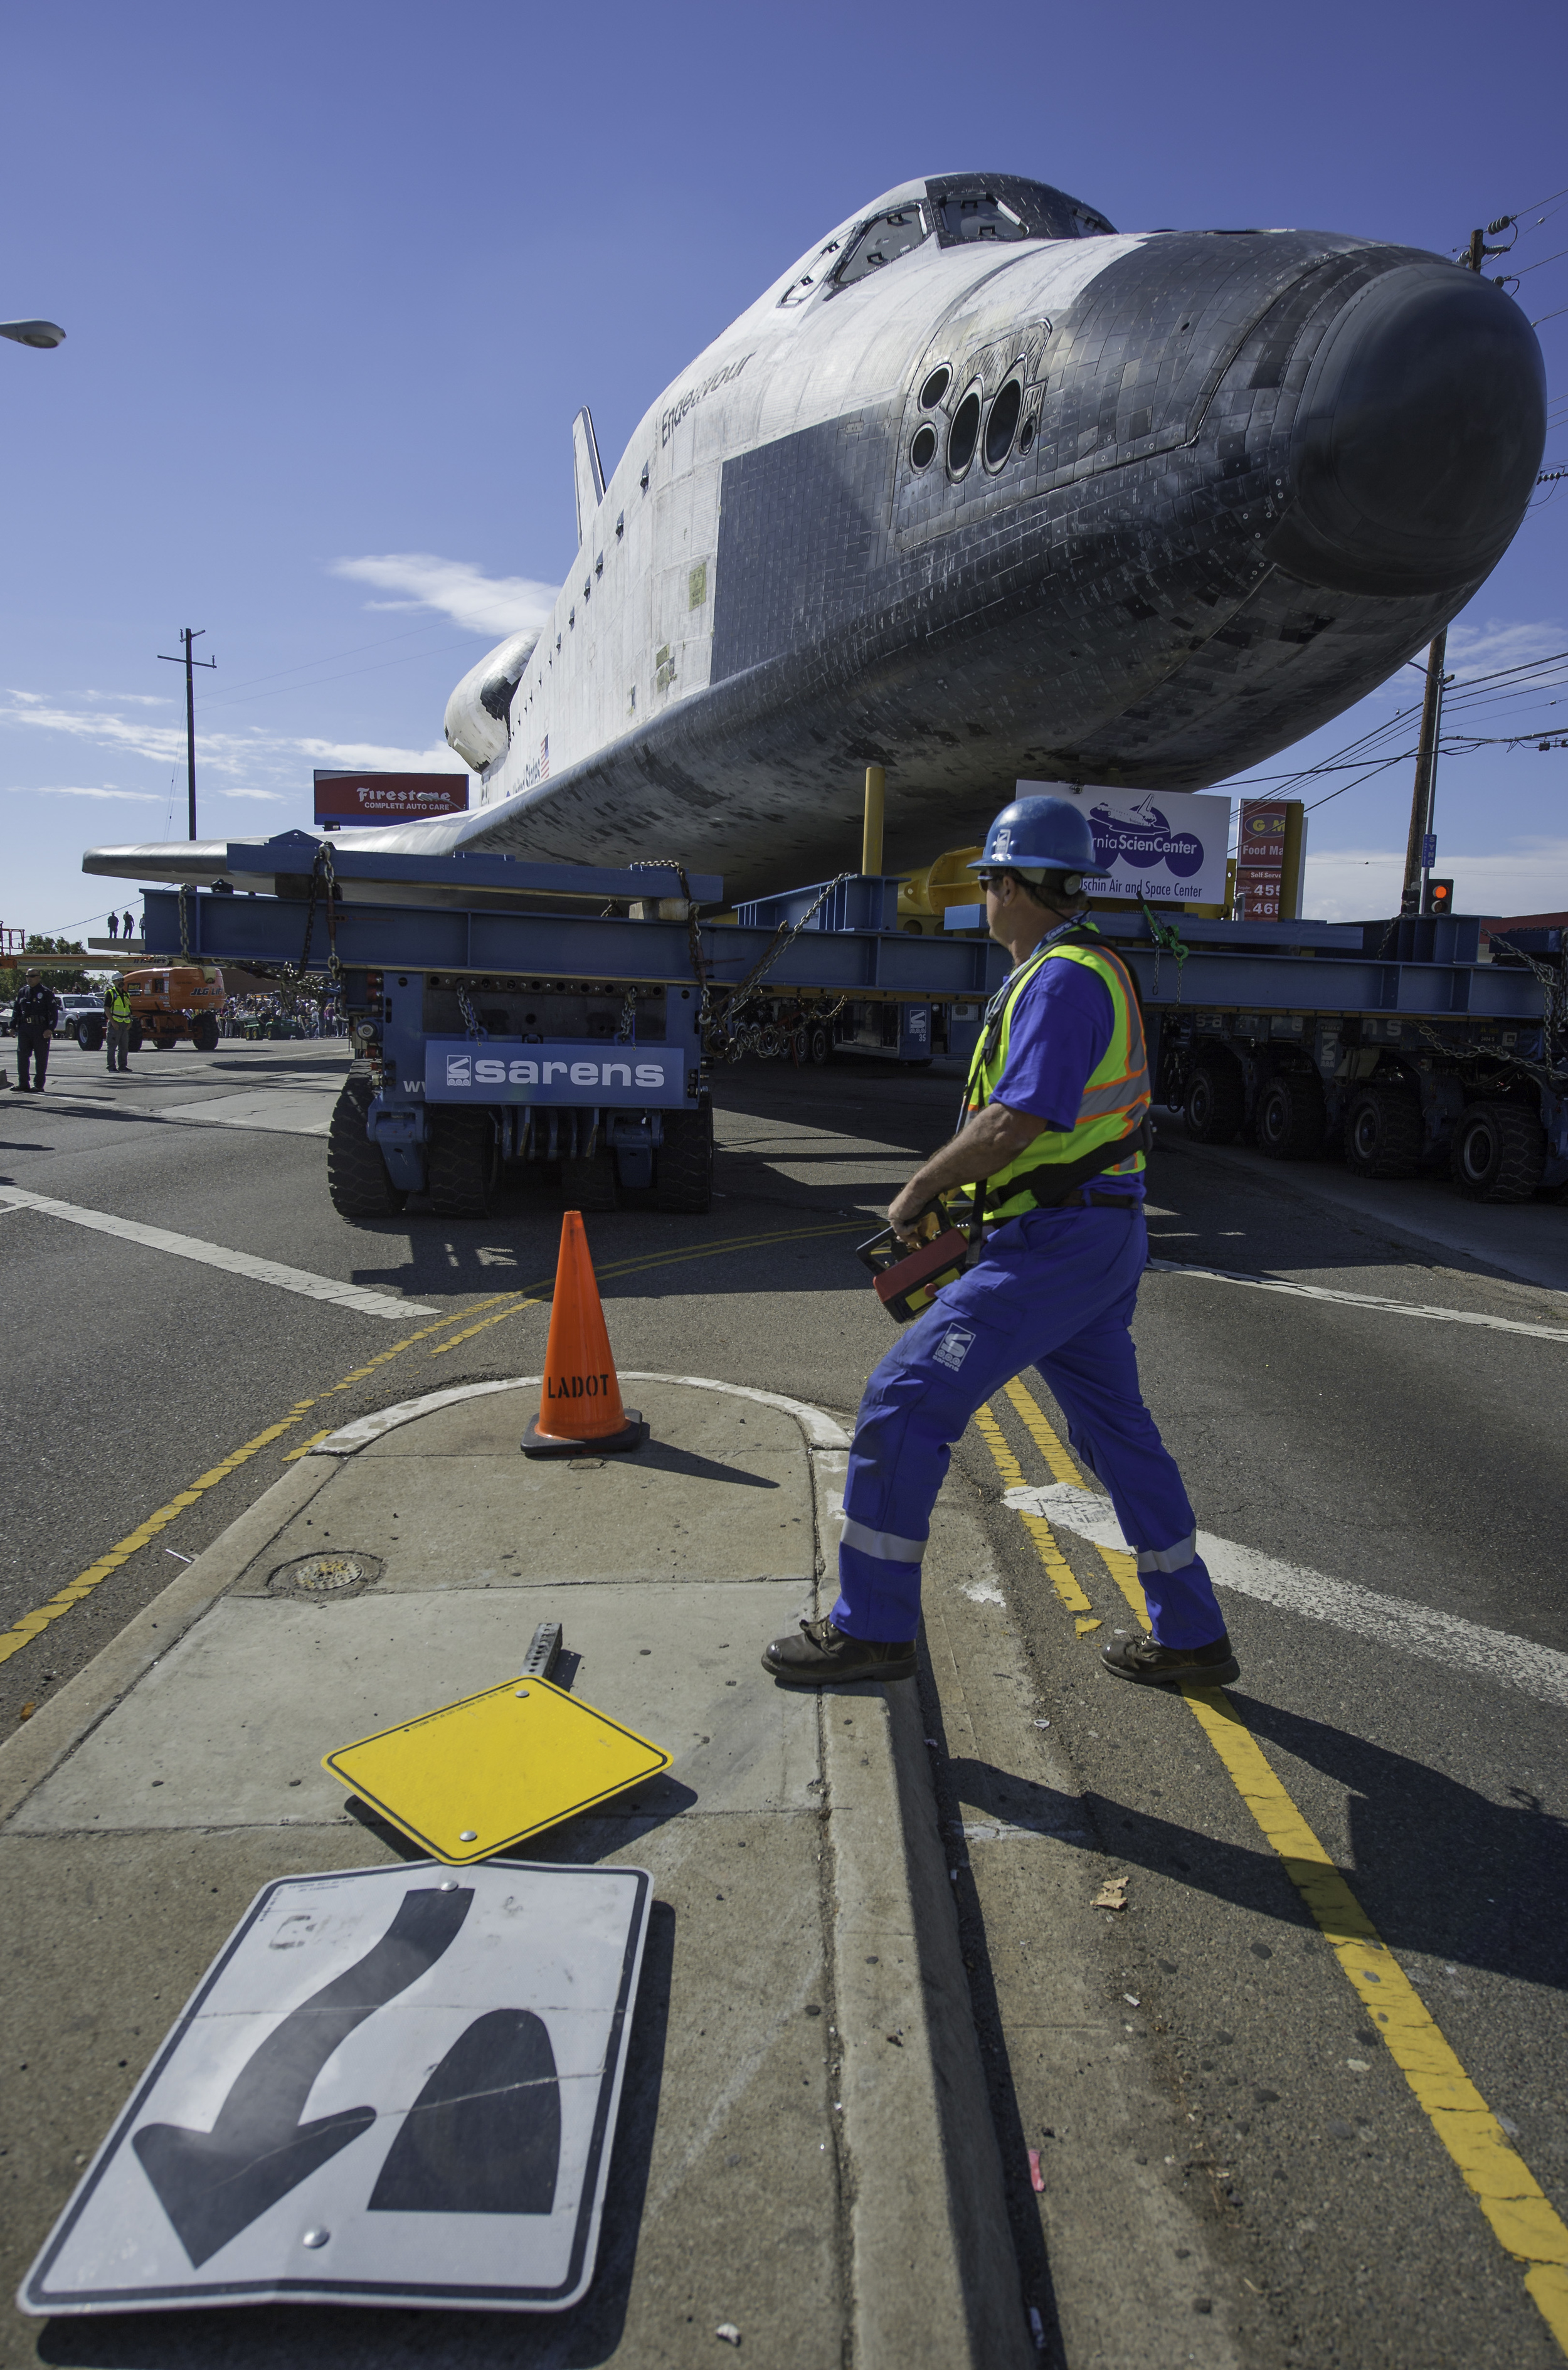  The driver of the Over Land Transporter (OLT) is seen as he maneuvers the space shuttle Endeavour on the streets of Los Angeles as it heads to its new home at the California Science Center, Friday, Oct. 12, 2012. Endeavour, built as a replacement fo